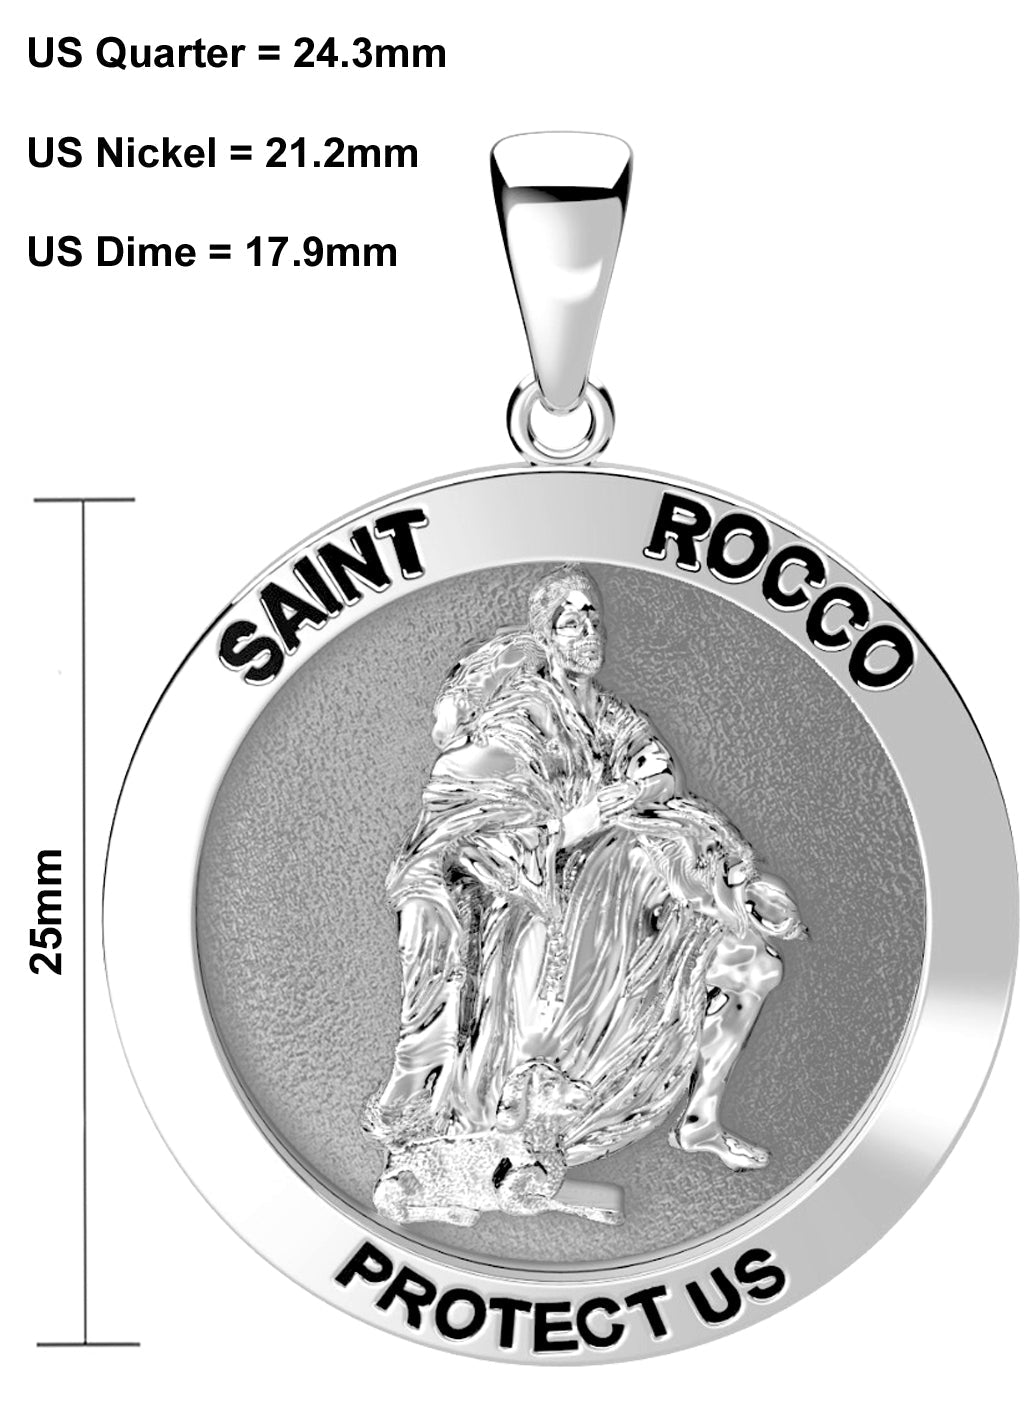 Men's 925 Sterling Silver 1in Saint Rocco Antique Finish Pendant Necklace, 25mm - US Jewels